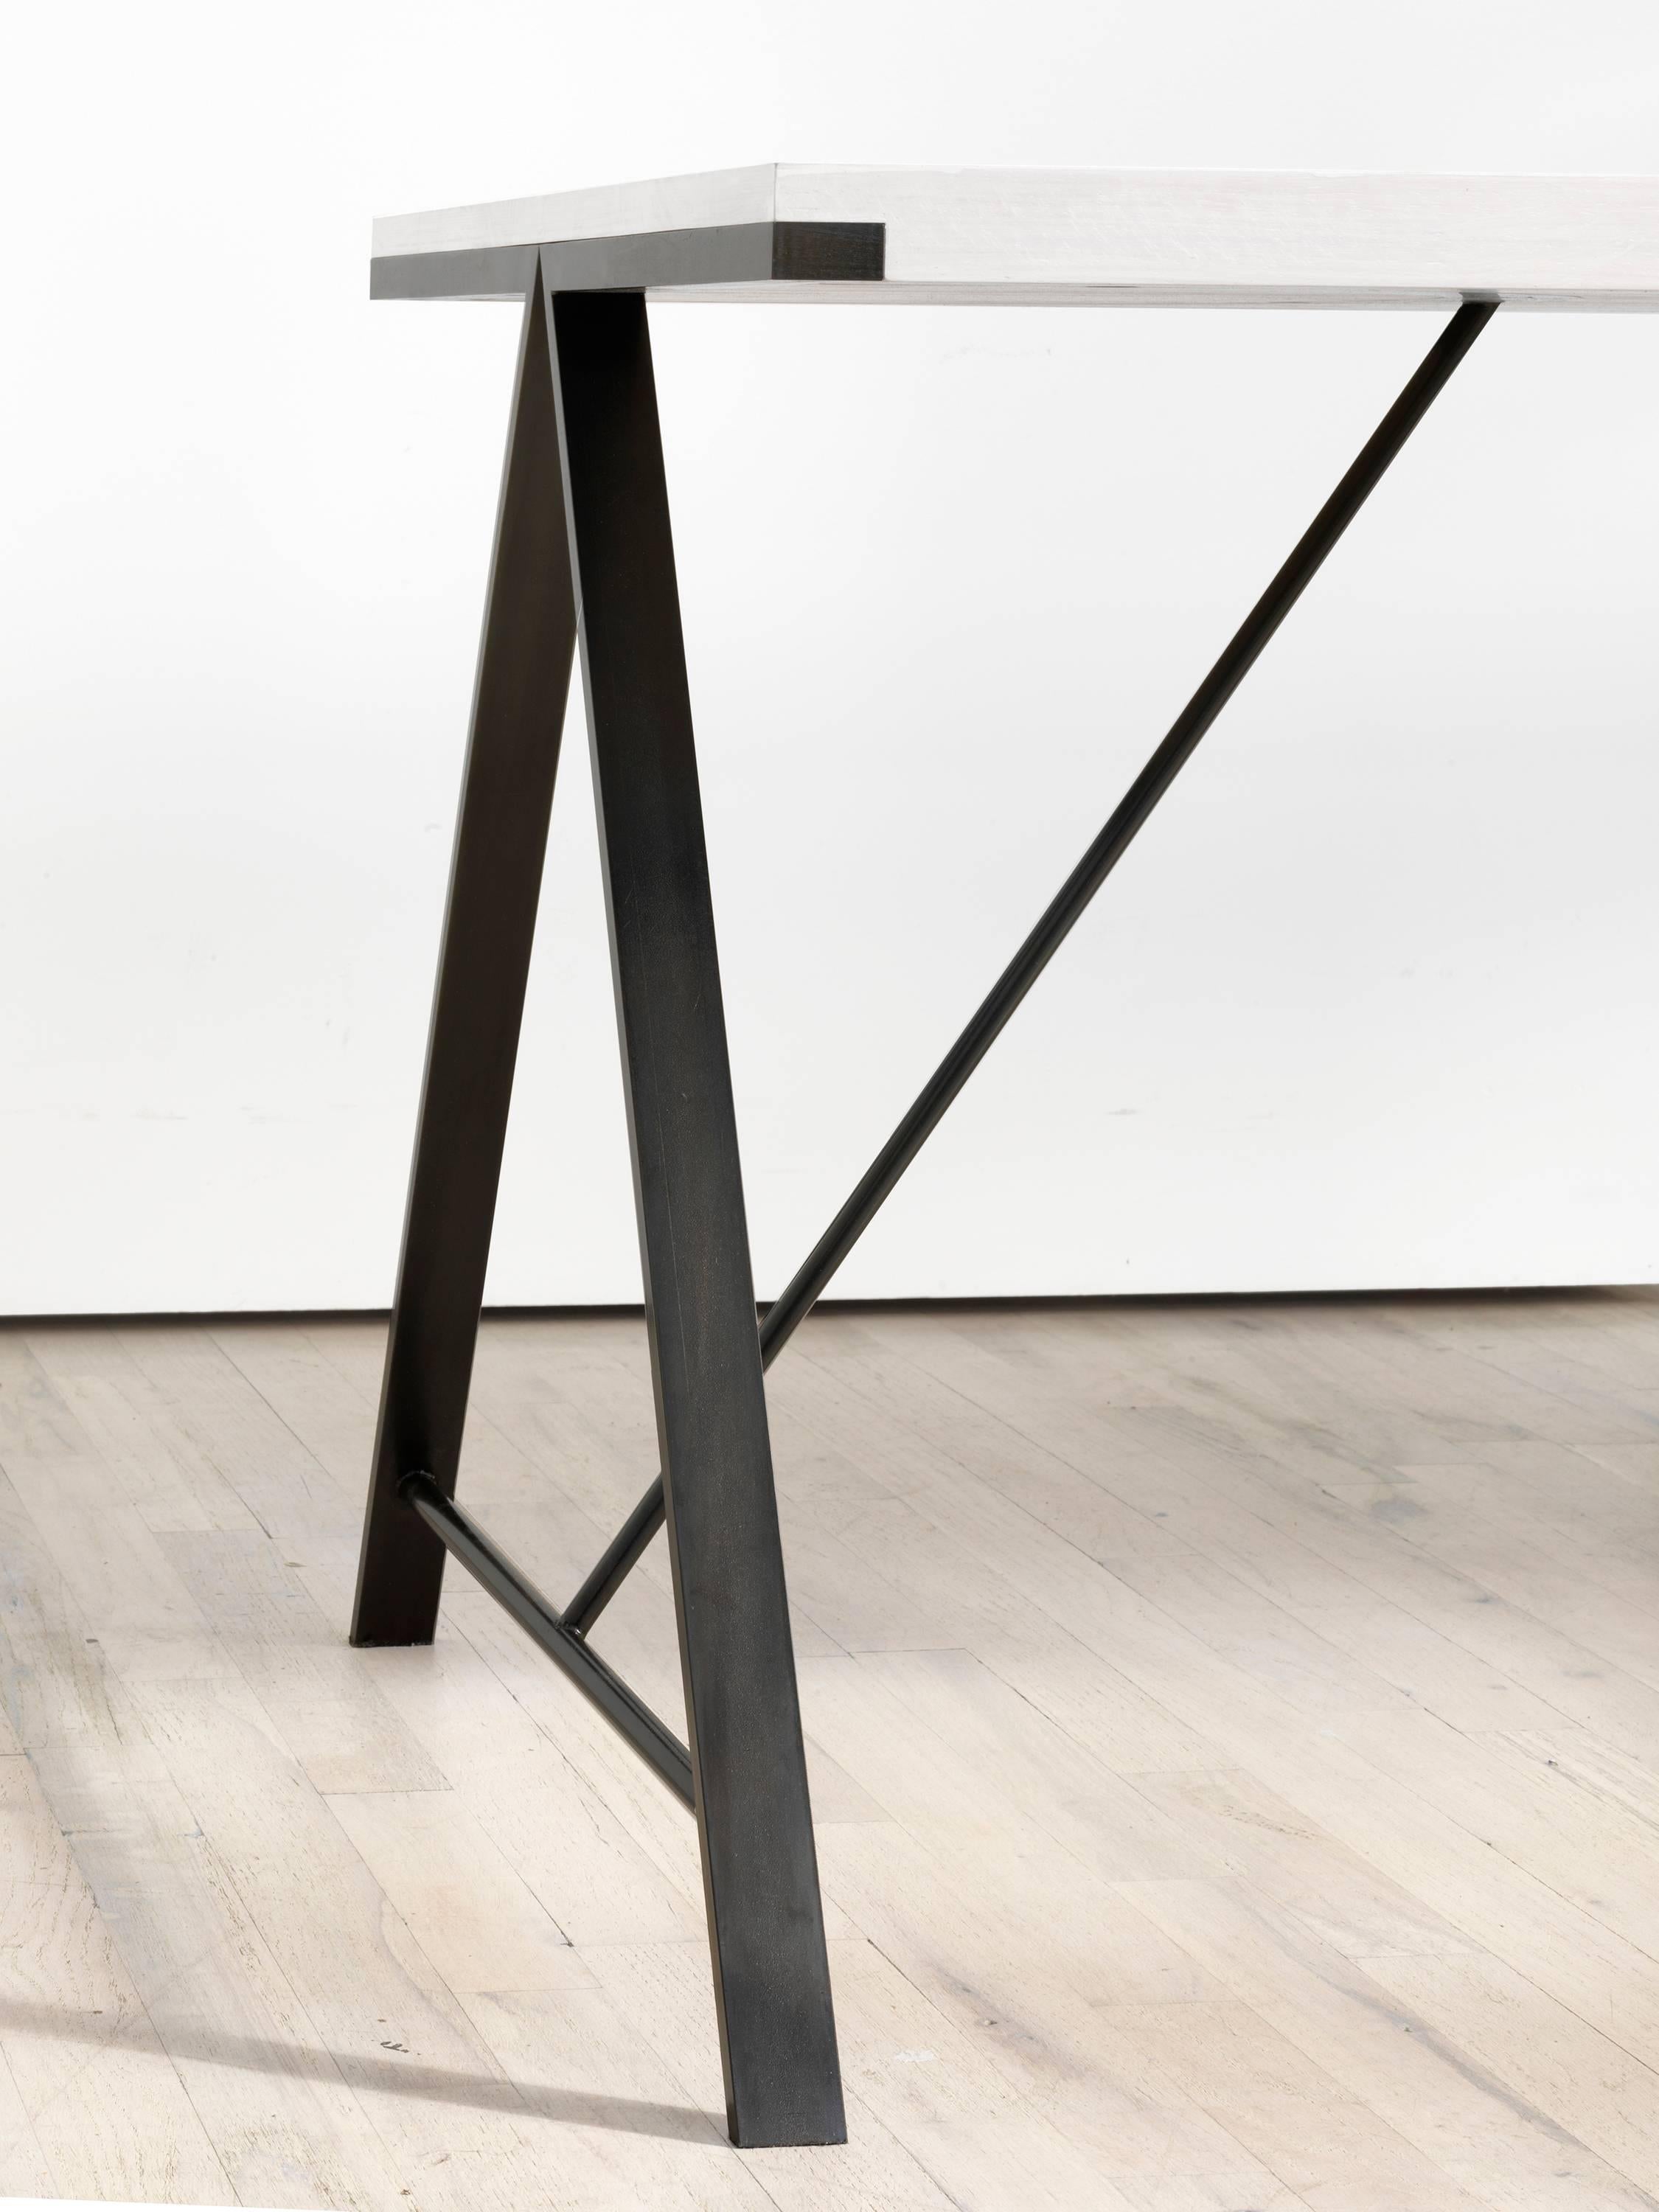 The clean lines and simple form of the A-Table convey a sense of lightness and precision. A small reveal at the corners expresses the connection to the top and the structure hidden within.